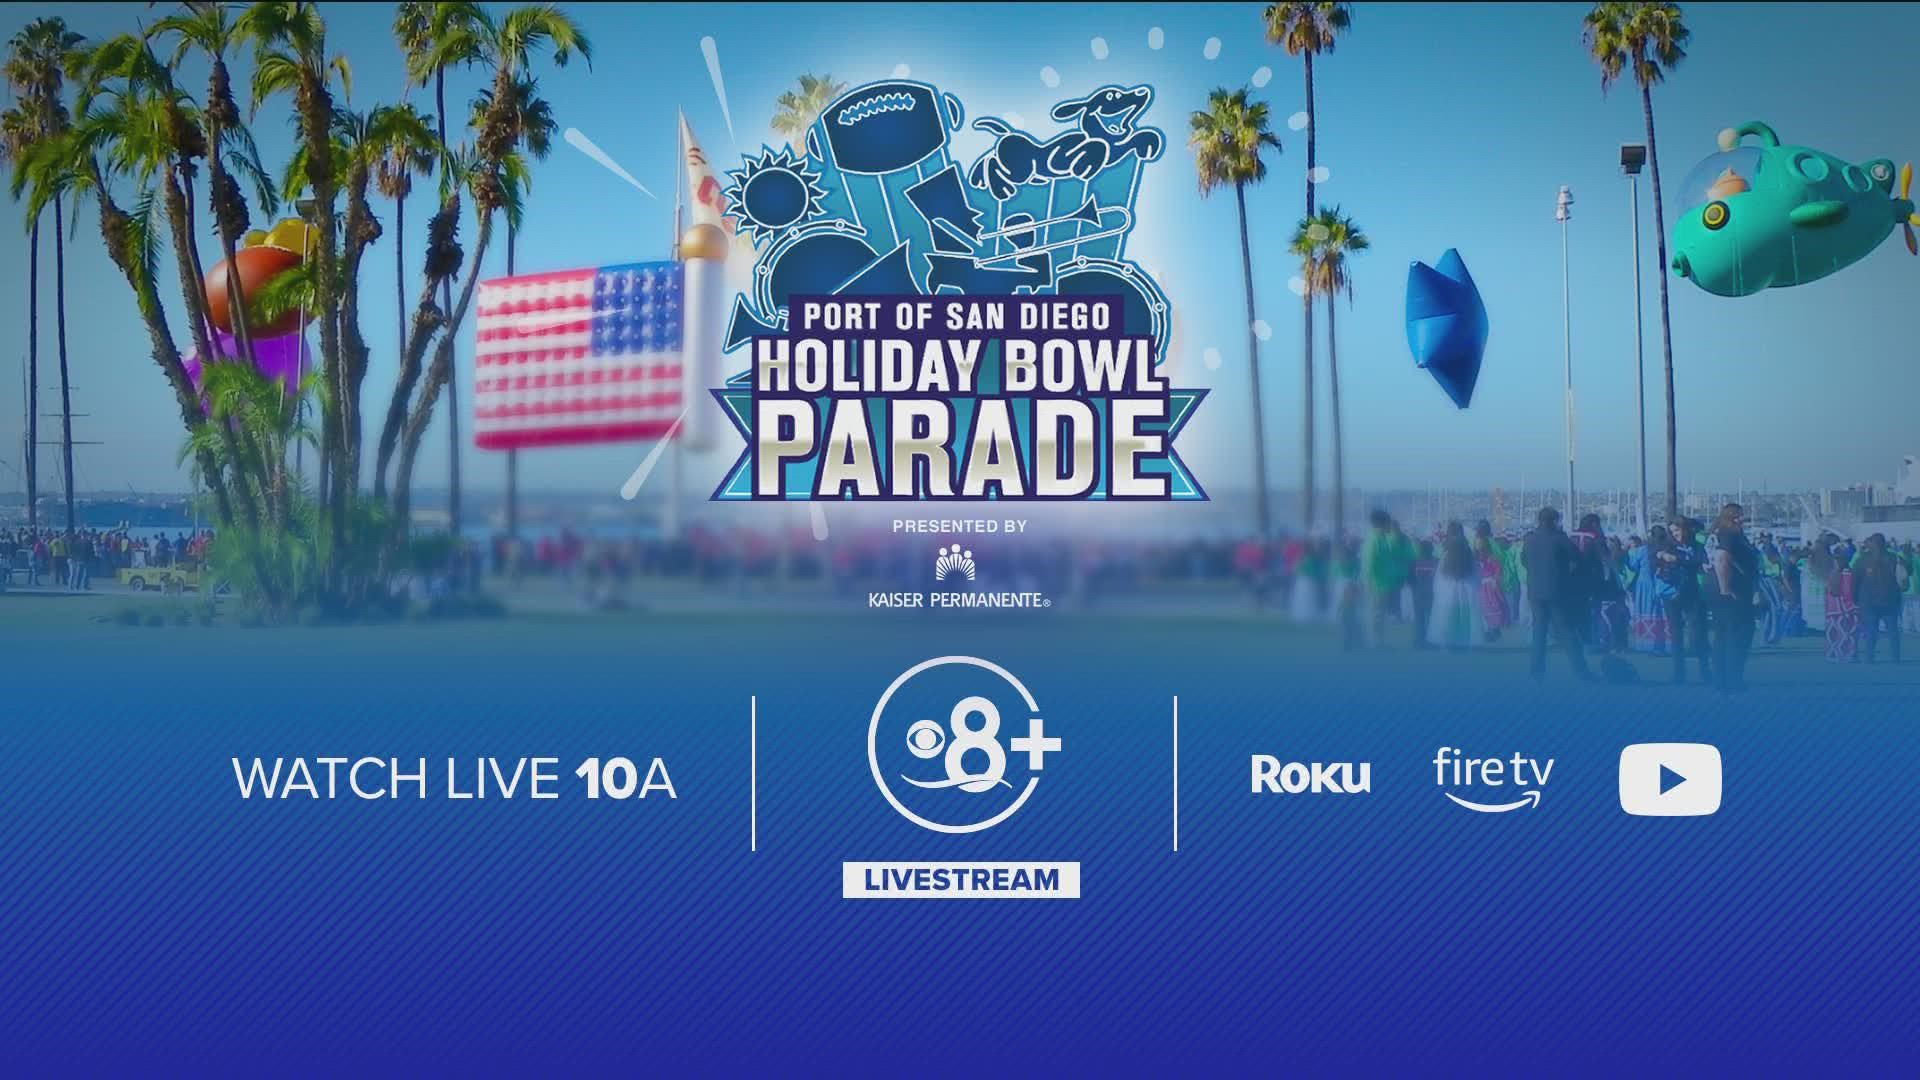 The Port of San Diego Holiday Bowl Parade presented by Kaiser Permanente will be live-streamed on CBS8+ on Dec. 28 at 10 am.